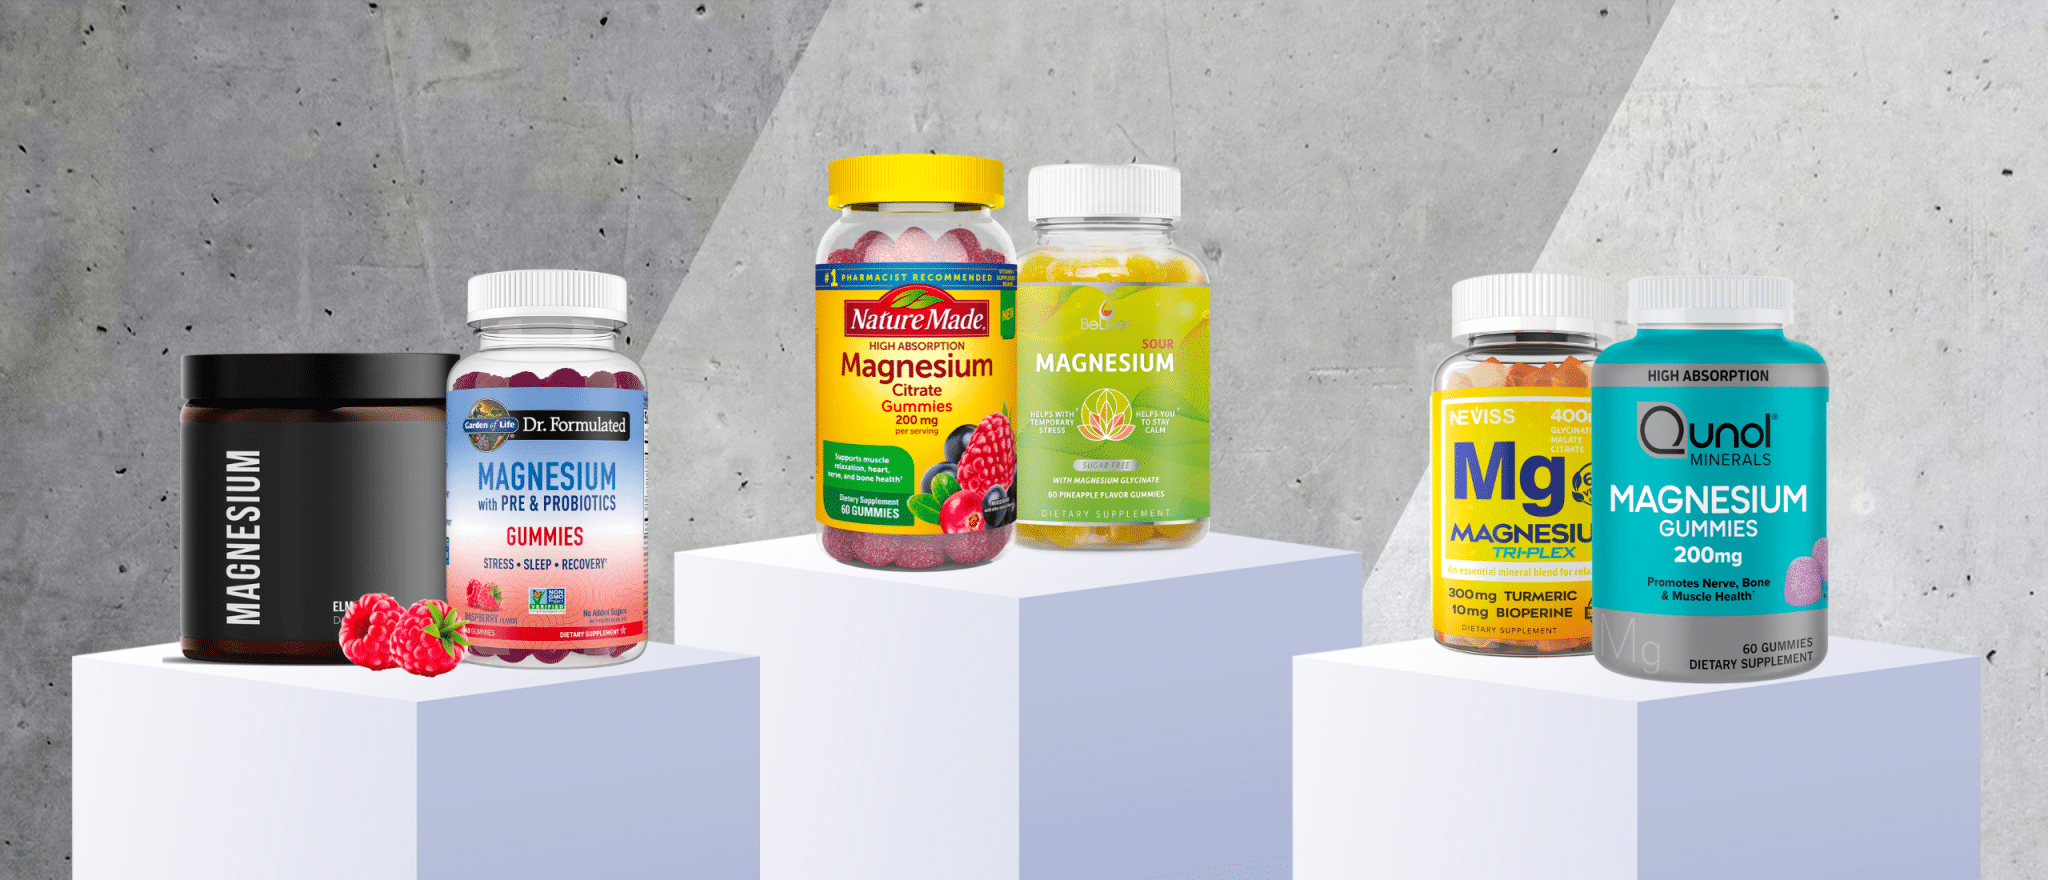 Health Nerds Are All About Magnesium Gummies Now. Why?